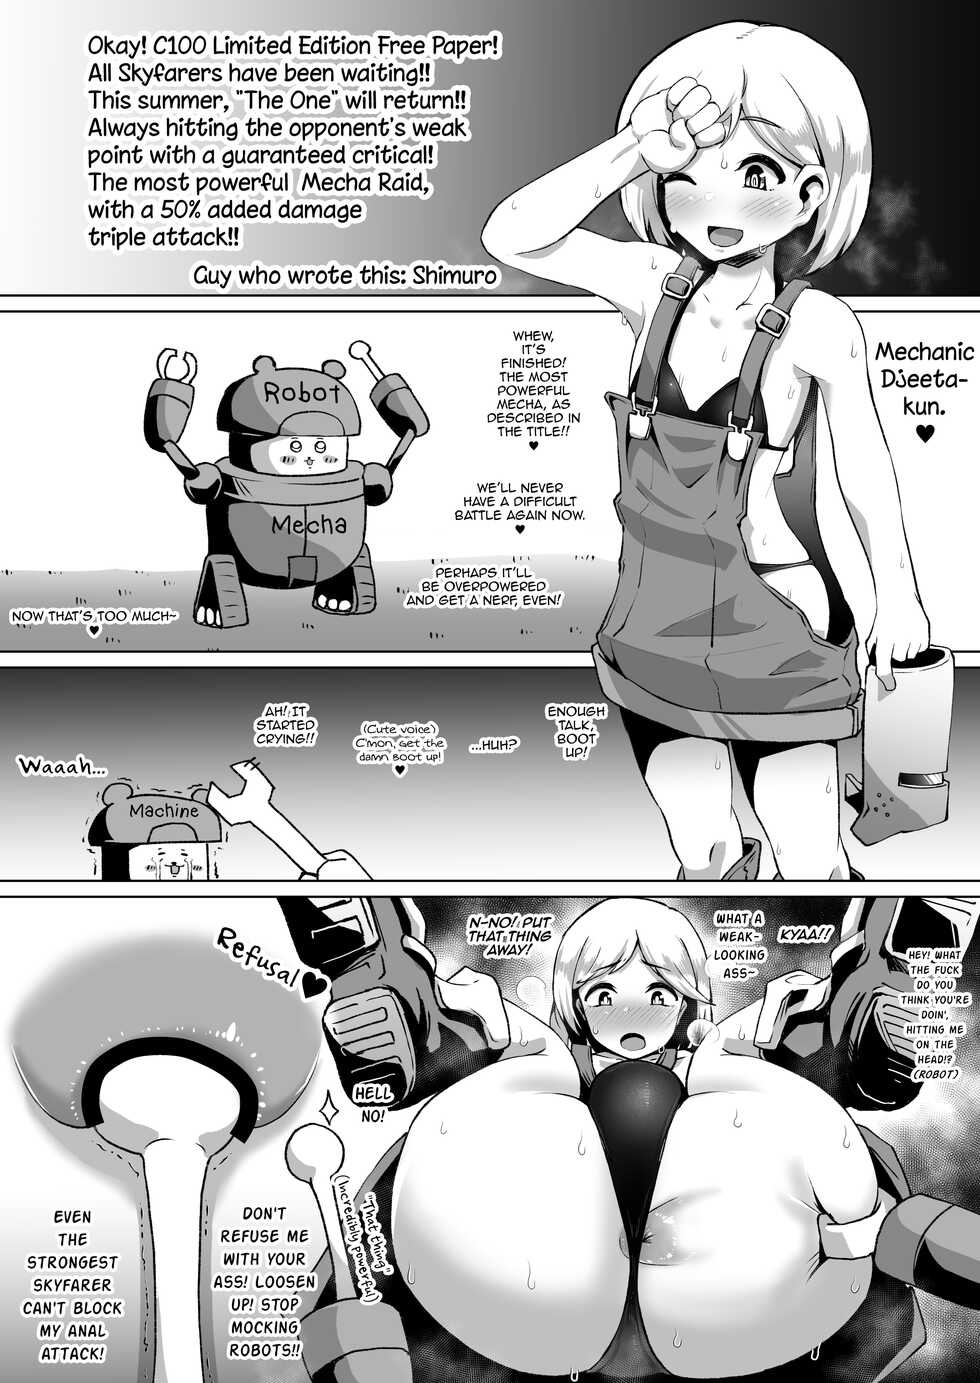 [Shimuro] Fanbox Works Collection (Granblue Fantasy, Kantai Collection -KanColle-) [English] [mysterymeat3] - Page 1